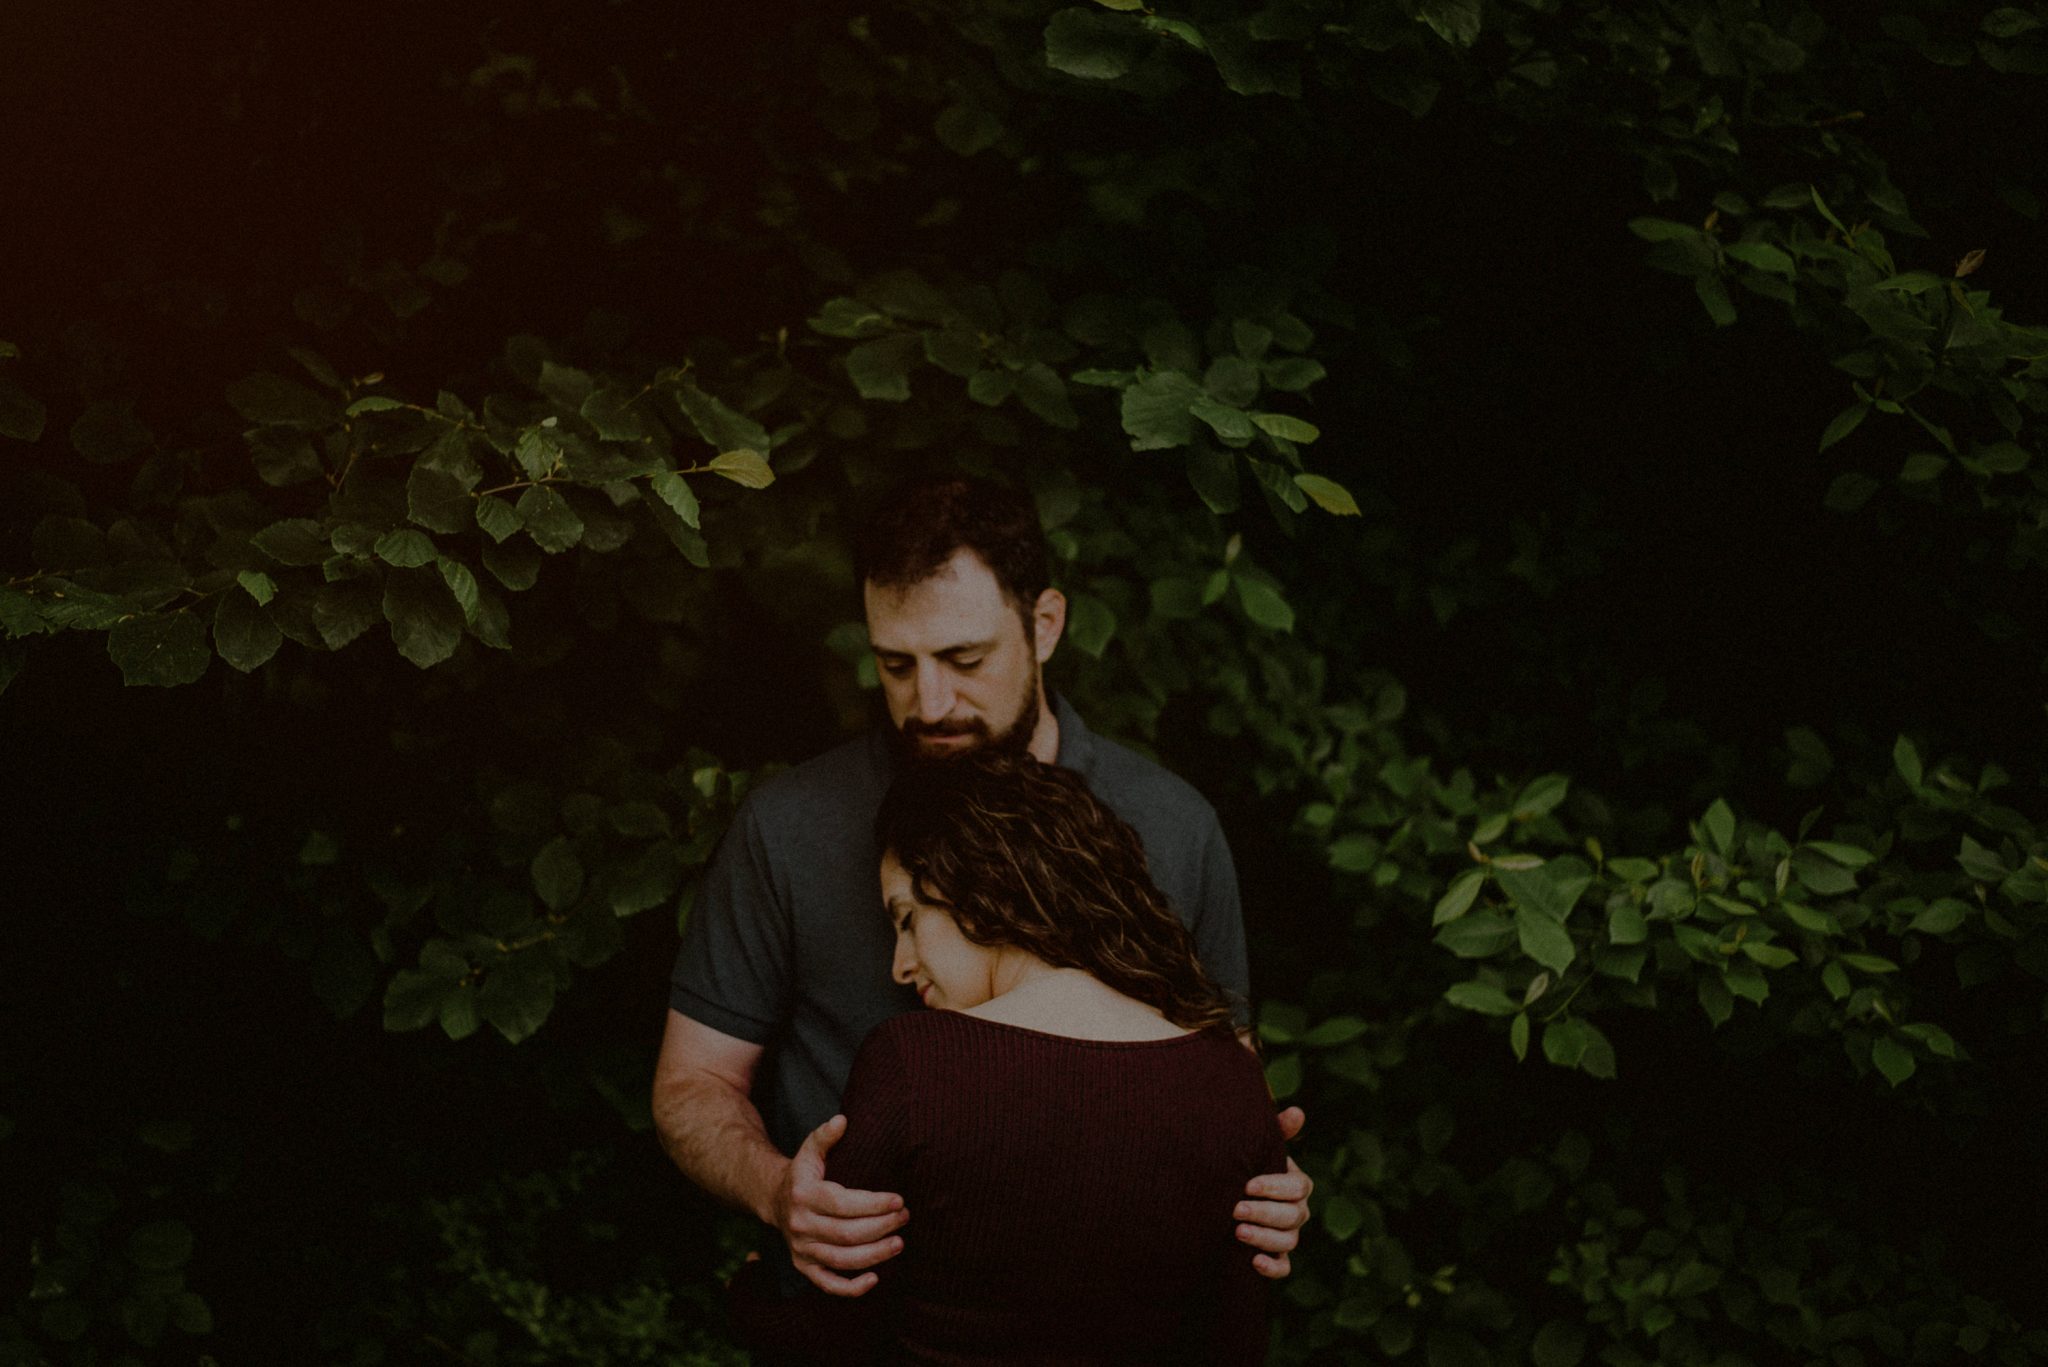 engagement session in the woods in nj